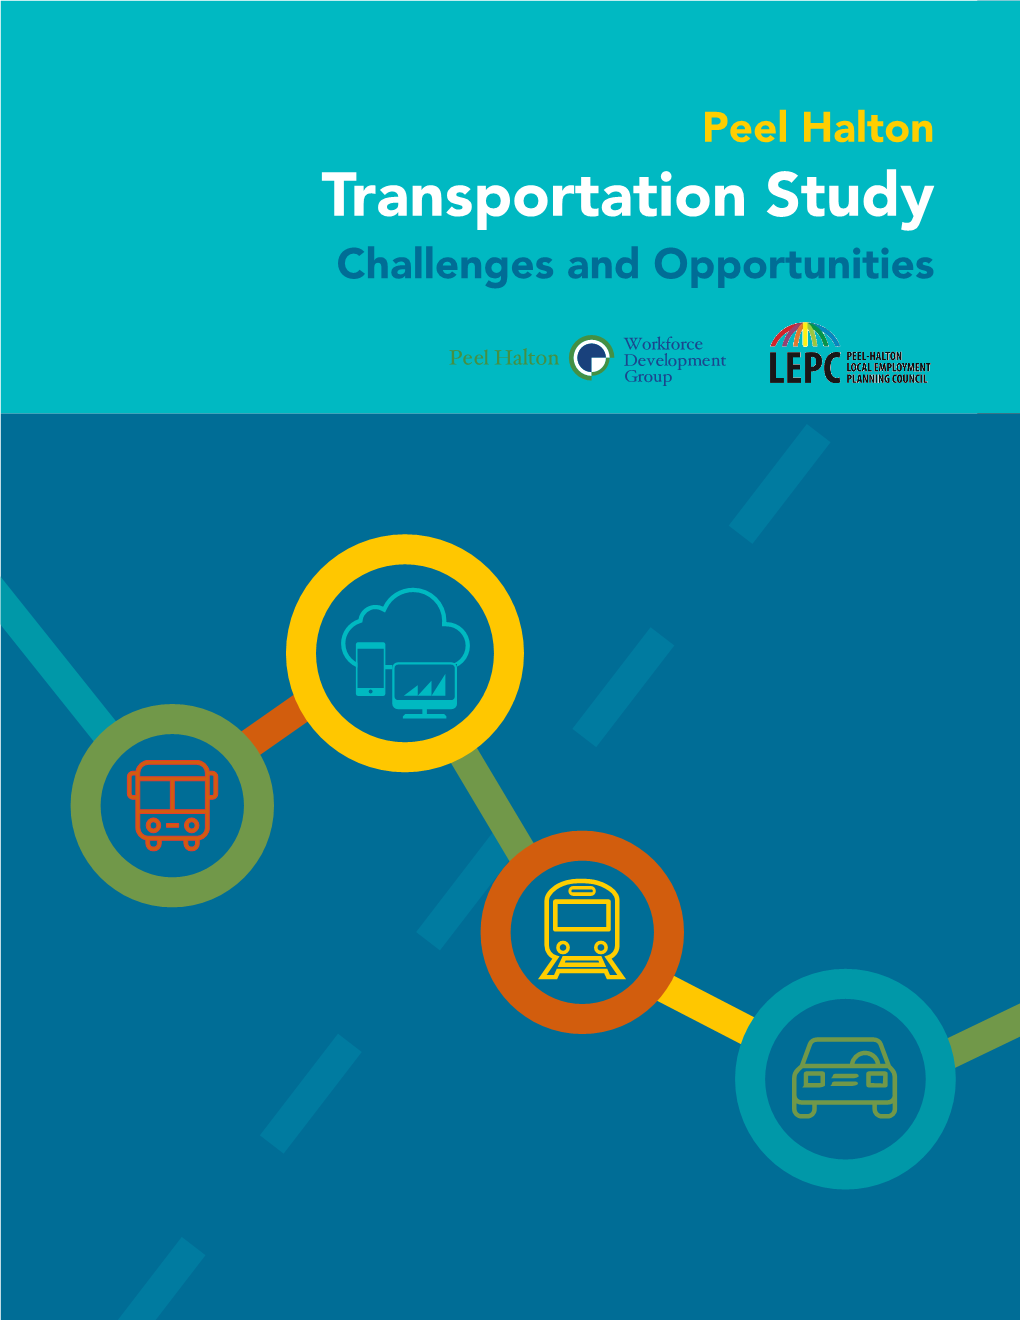 Peel Halton Transportation Study: Challenges and Opportunities